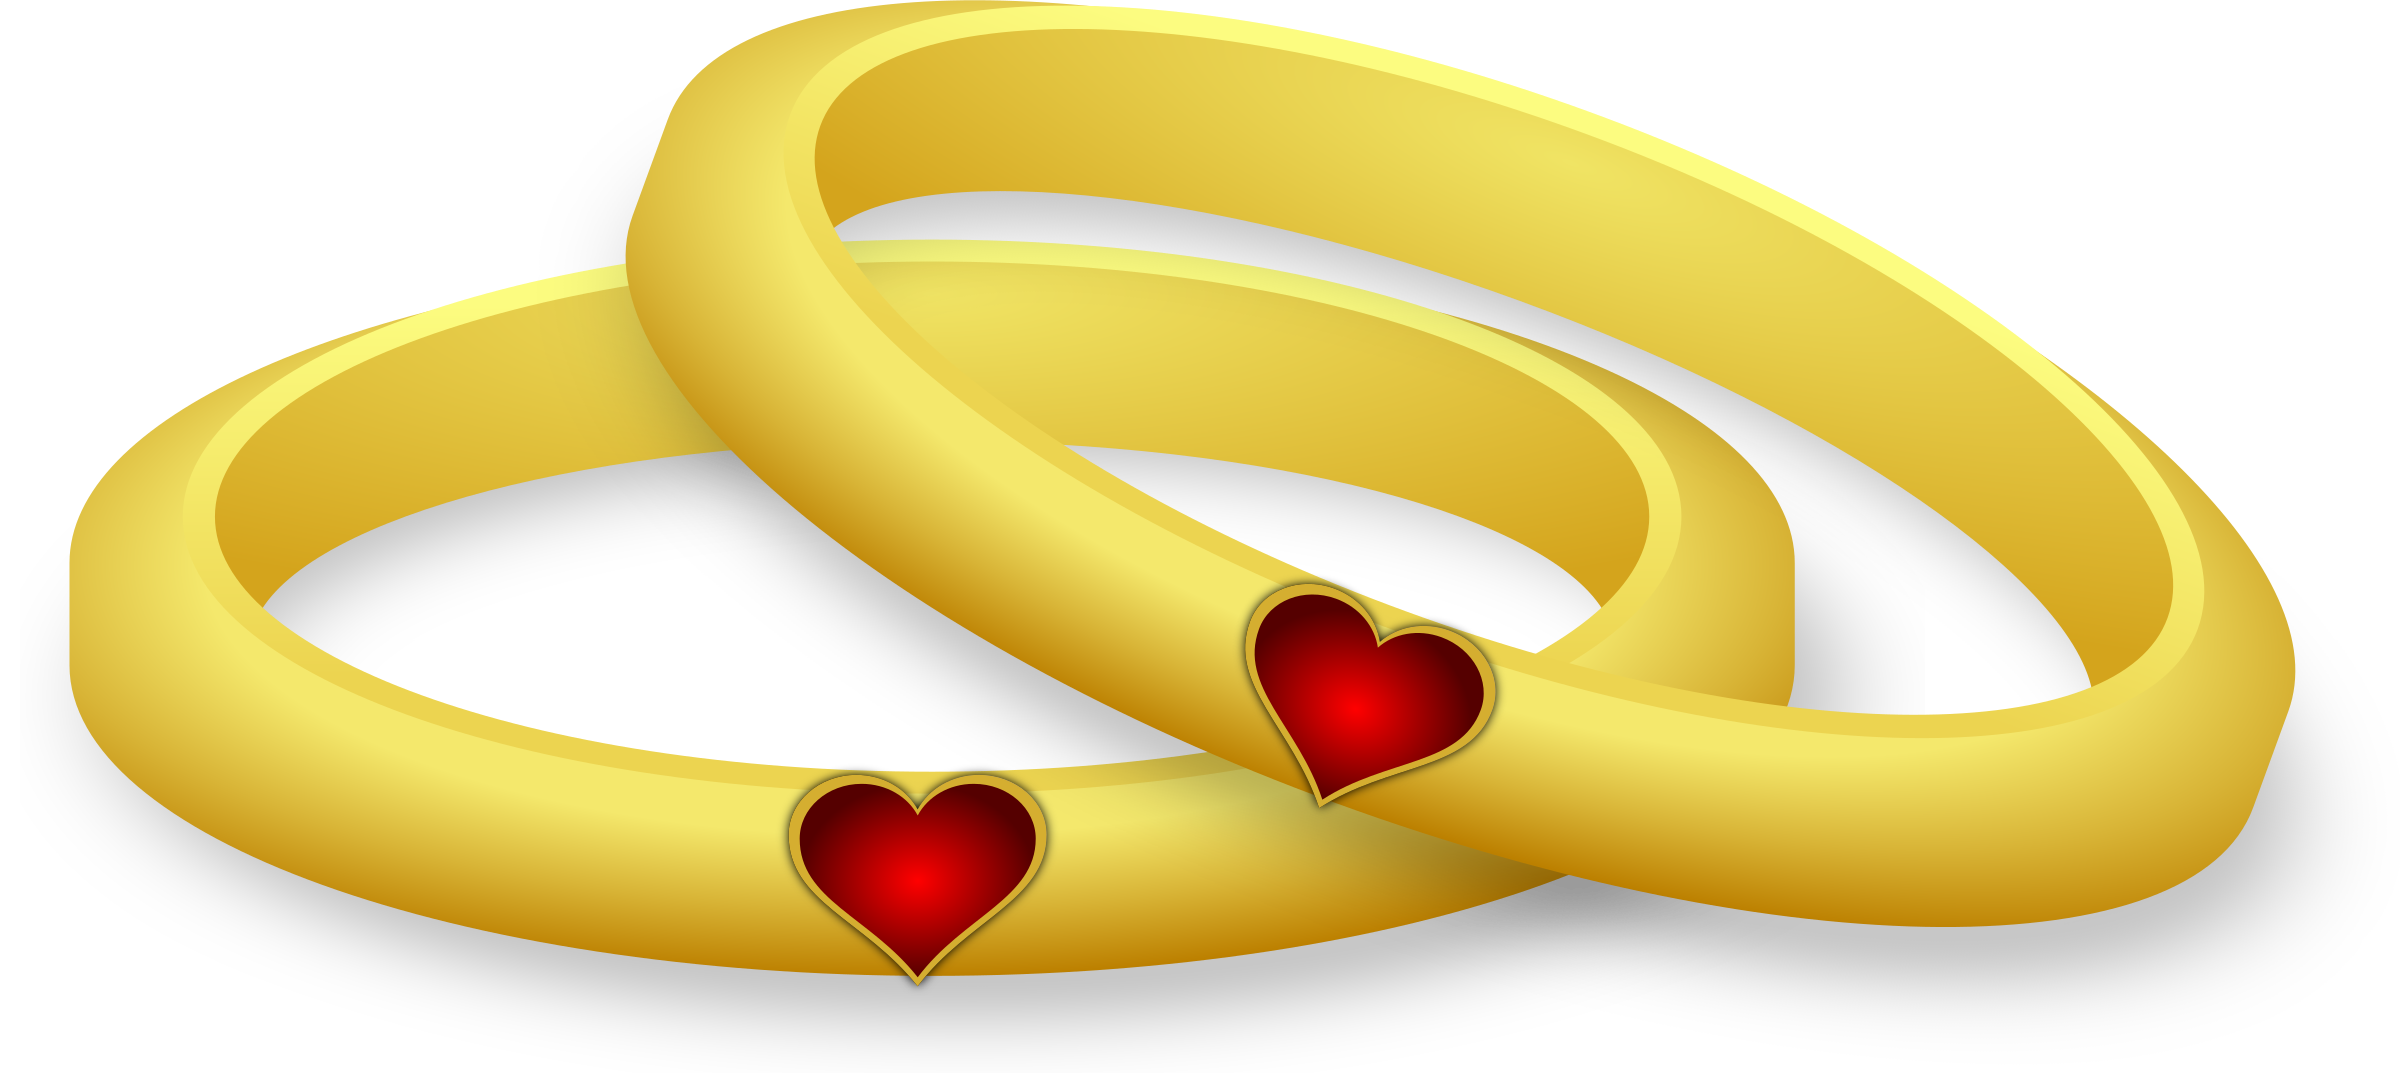 Download PNG image - Ring PNG Background Image 